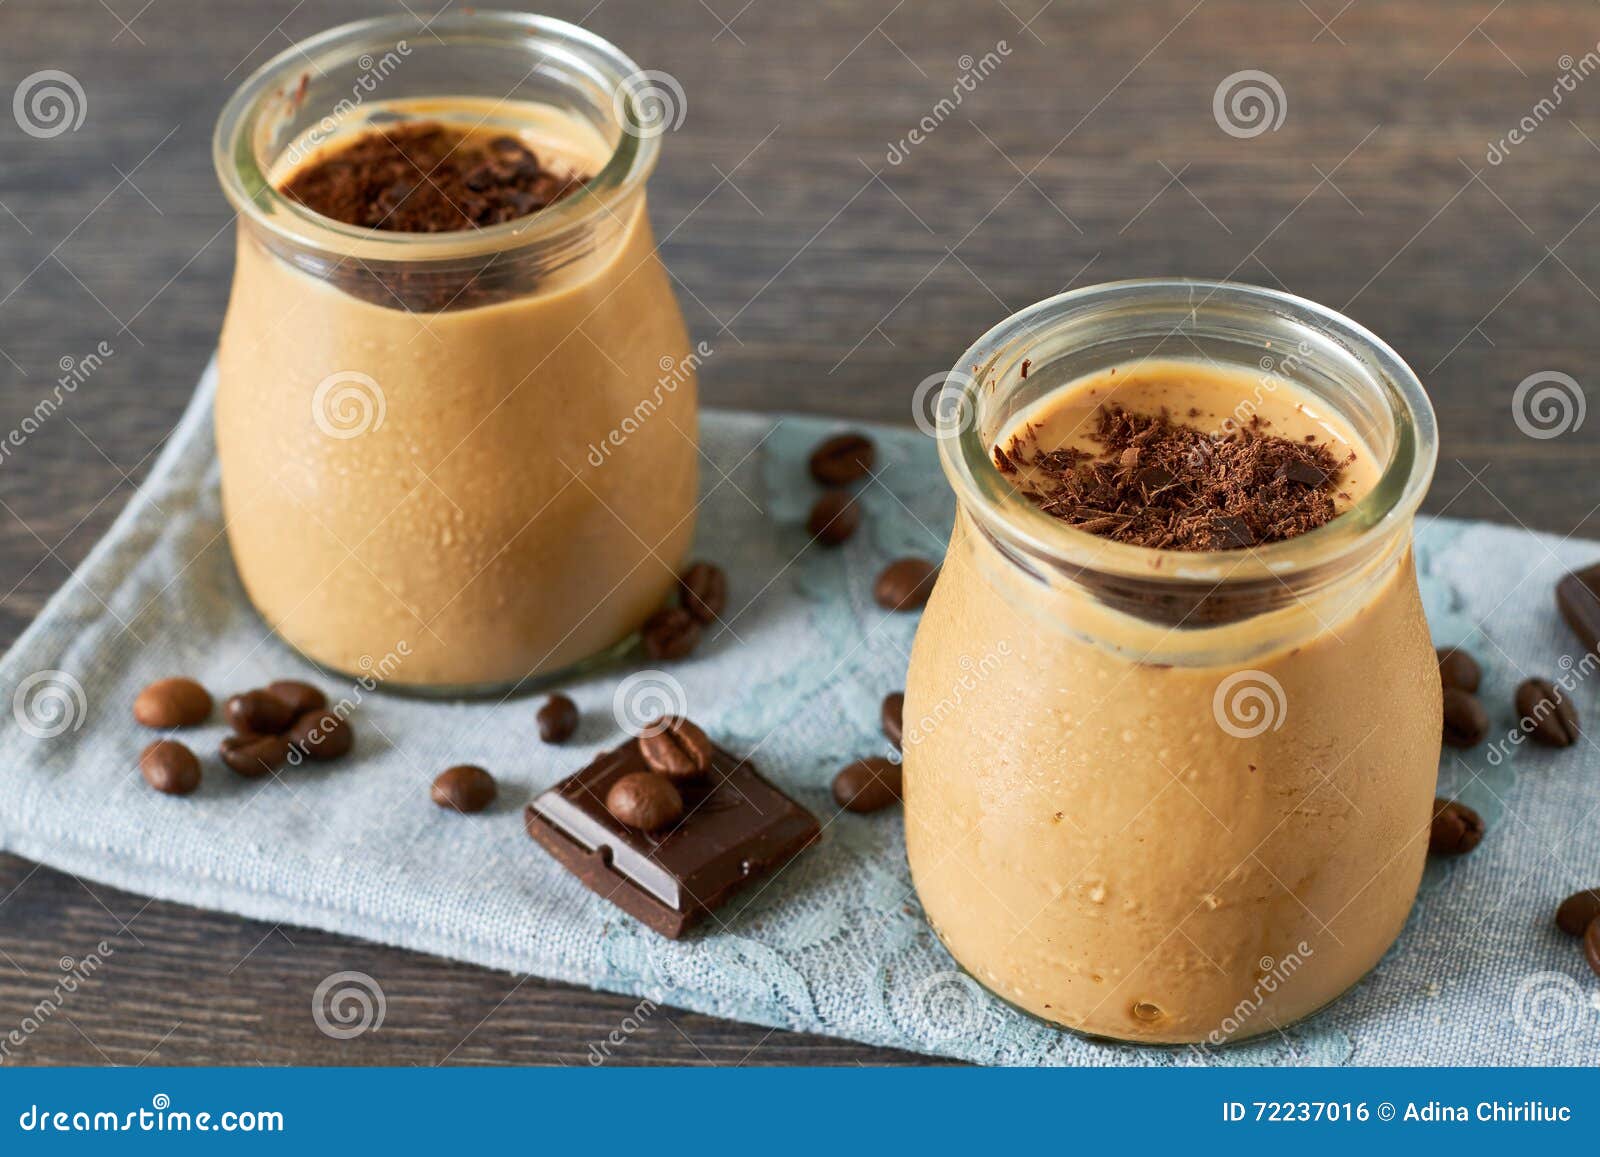 coffee and chocolate dessert in a glass jar